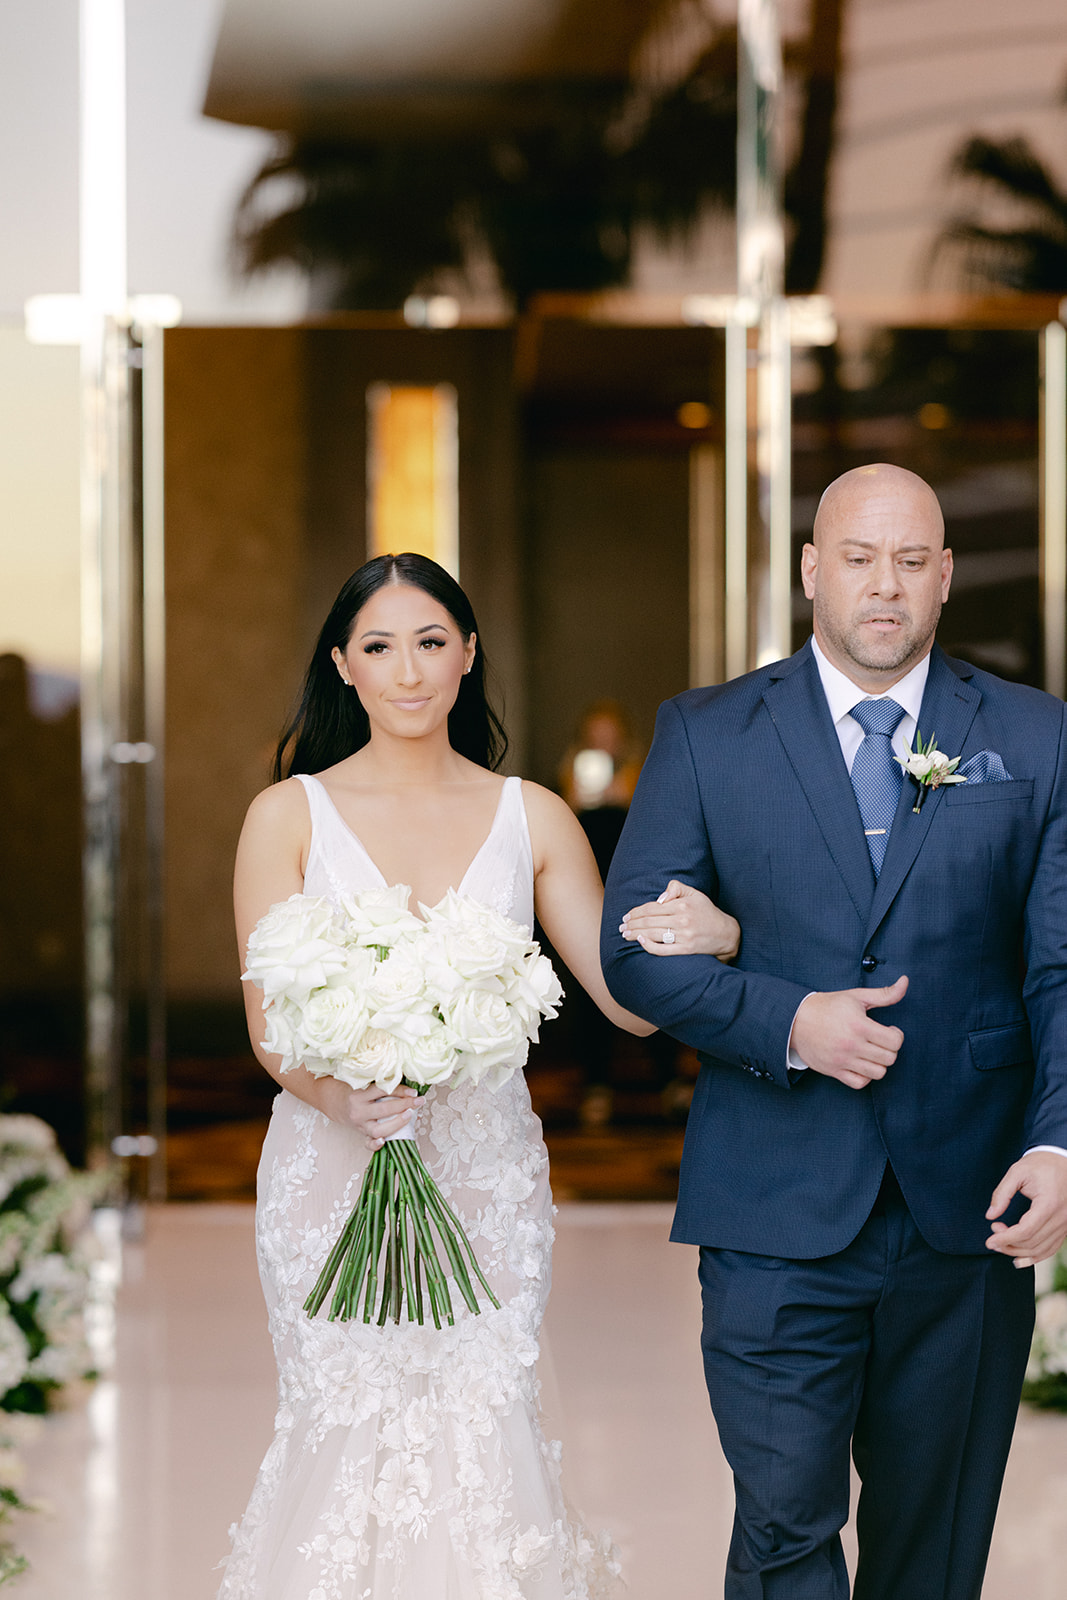 Bride with white rose bouquet walking down aisle with father 